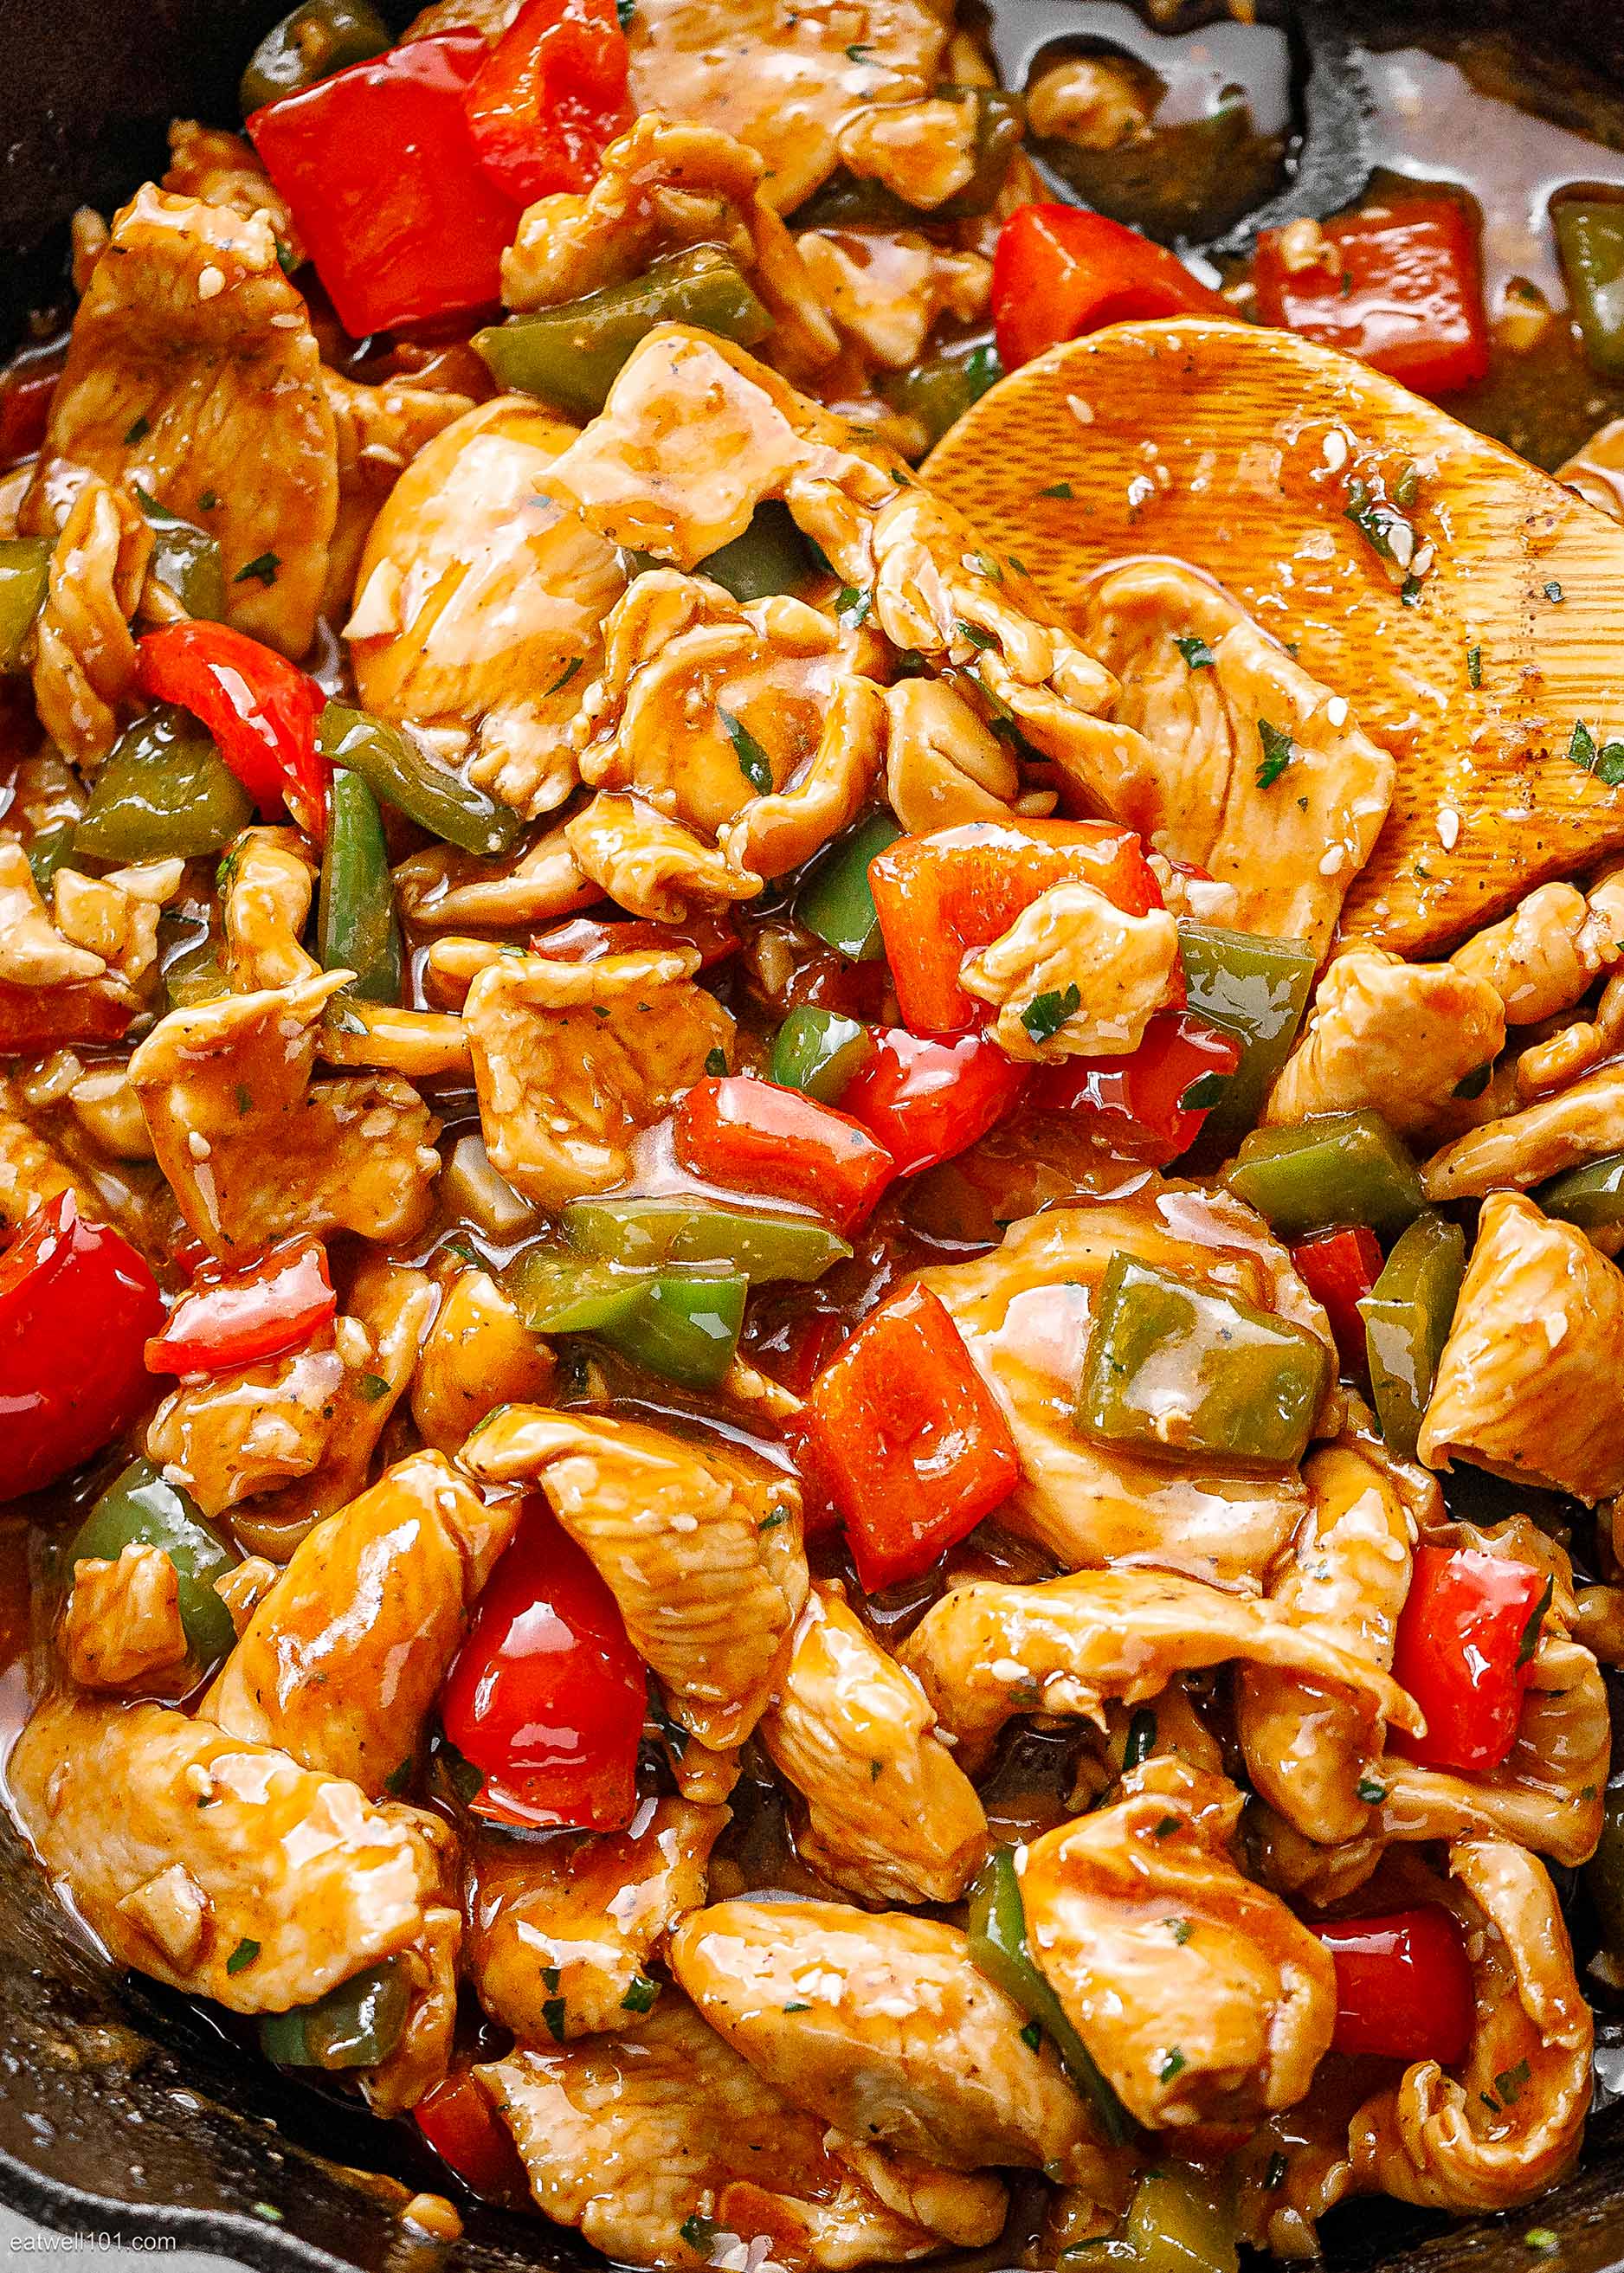 Chicken Stir-Fry With Mixed Peppers Recipe - NYT Cooking